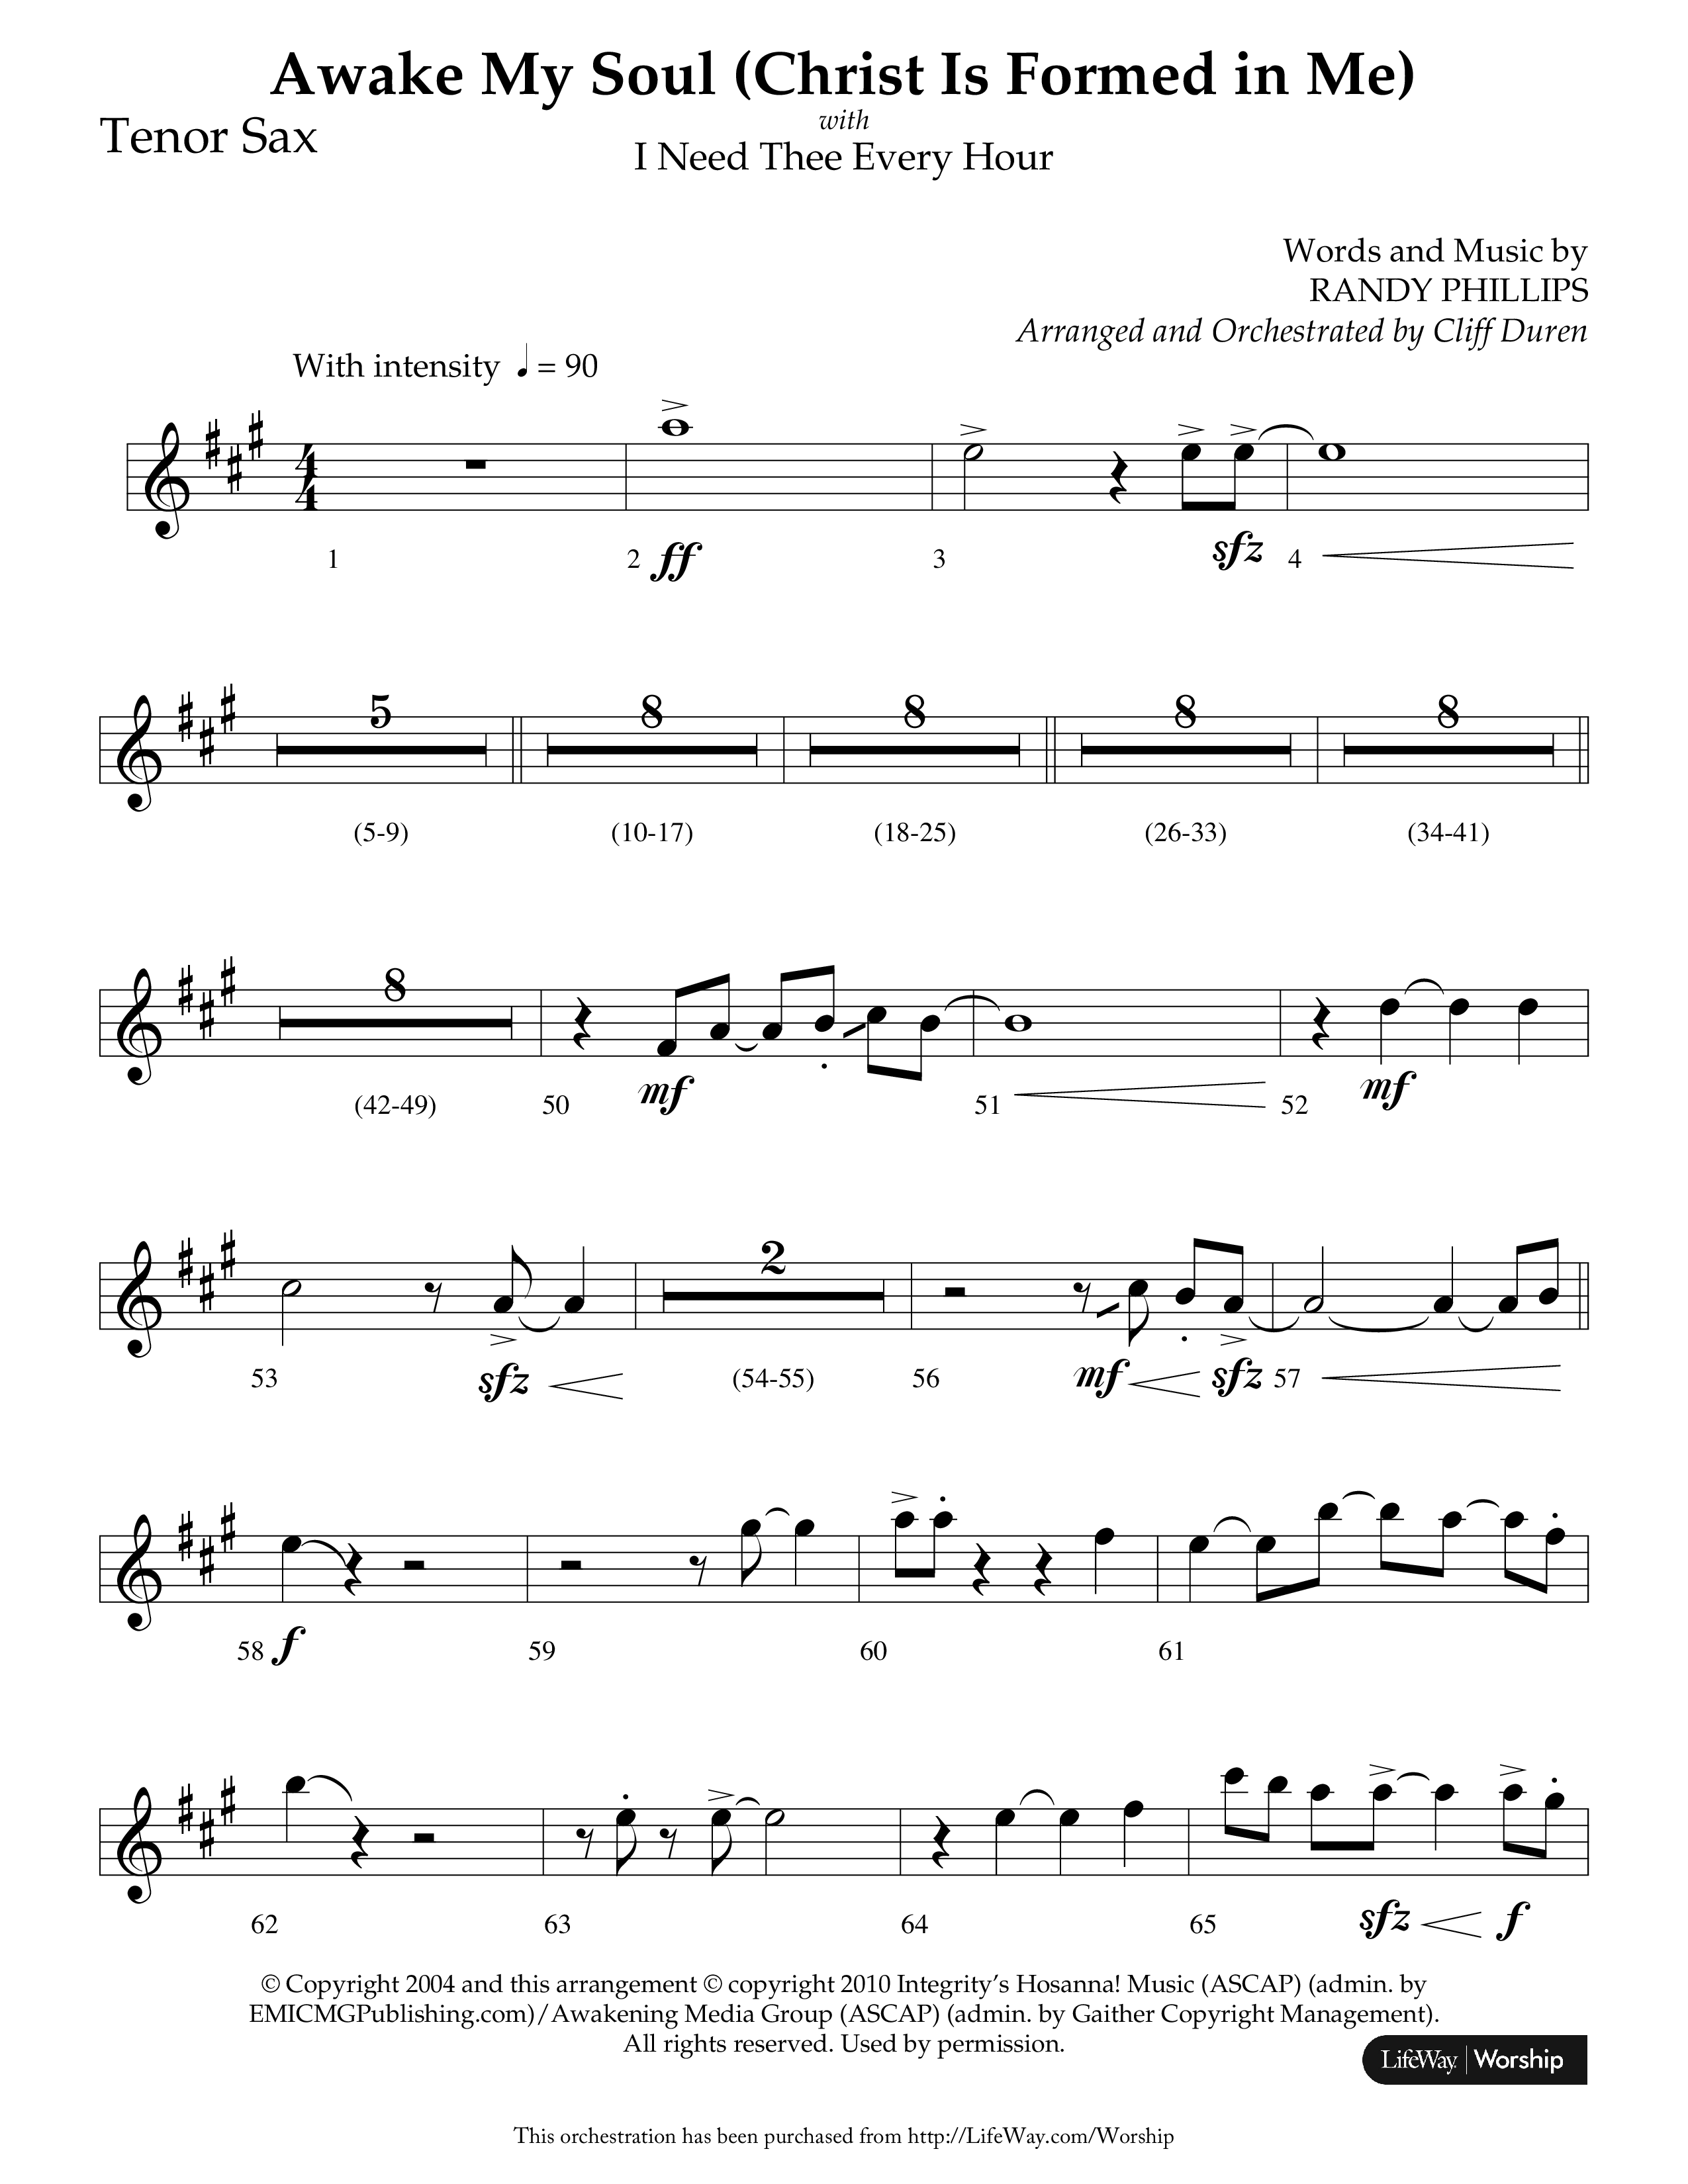 Awake My Soul (Christ Is Formed In Me) with I Need Thee Every Hour (Choral Anthem SATB) Tenor Sax 1 (Lifeway Choral / Arr. Cliff Duren)